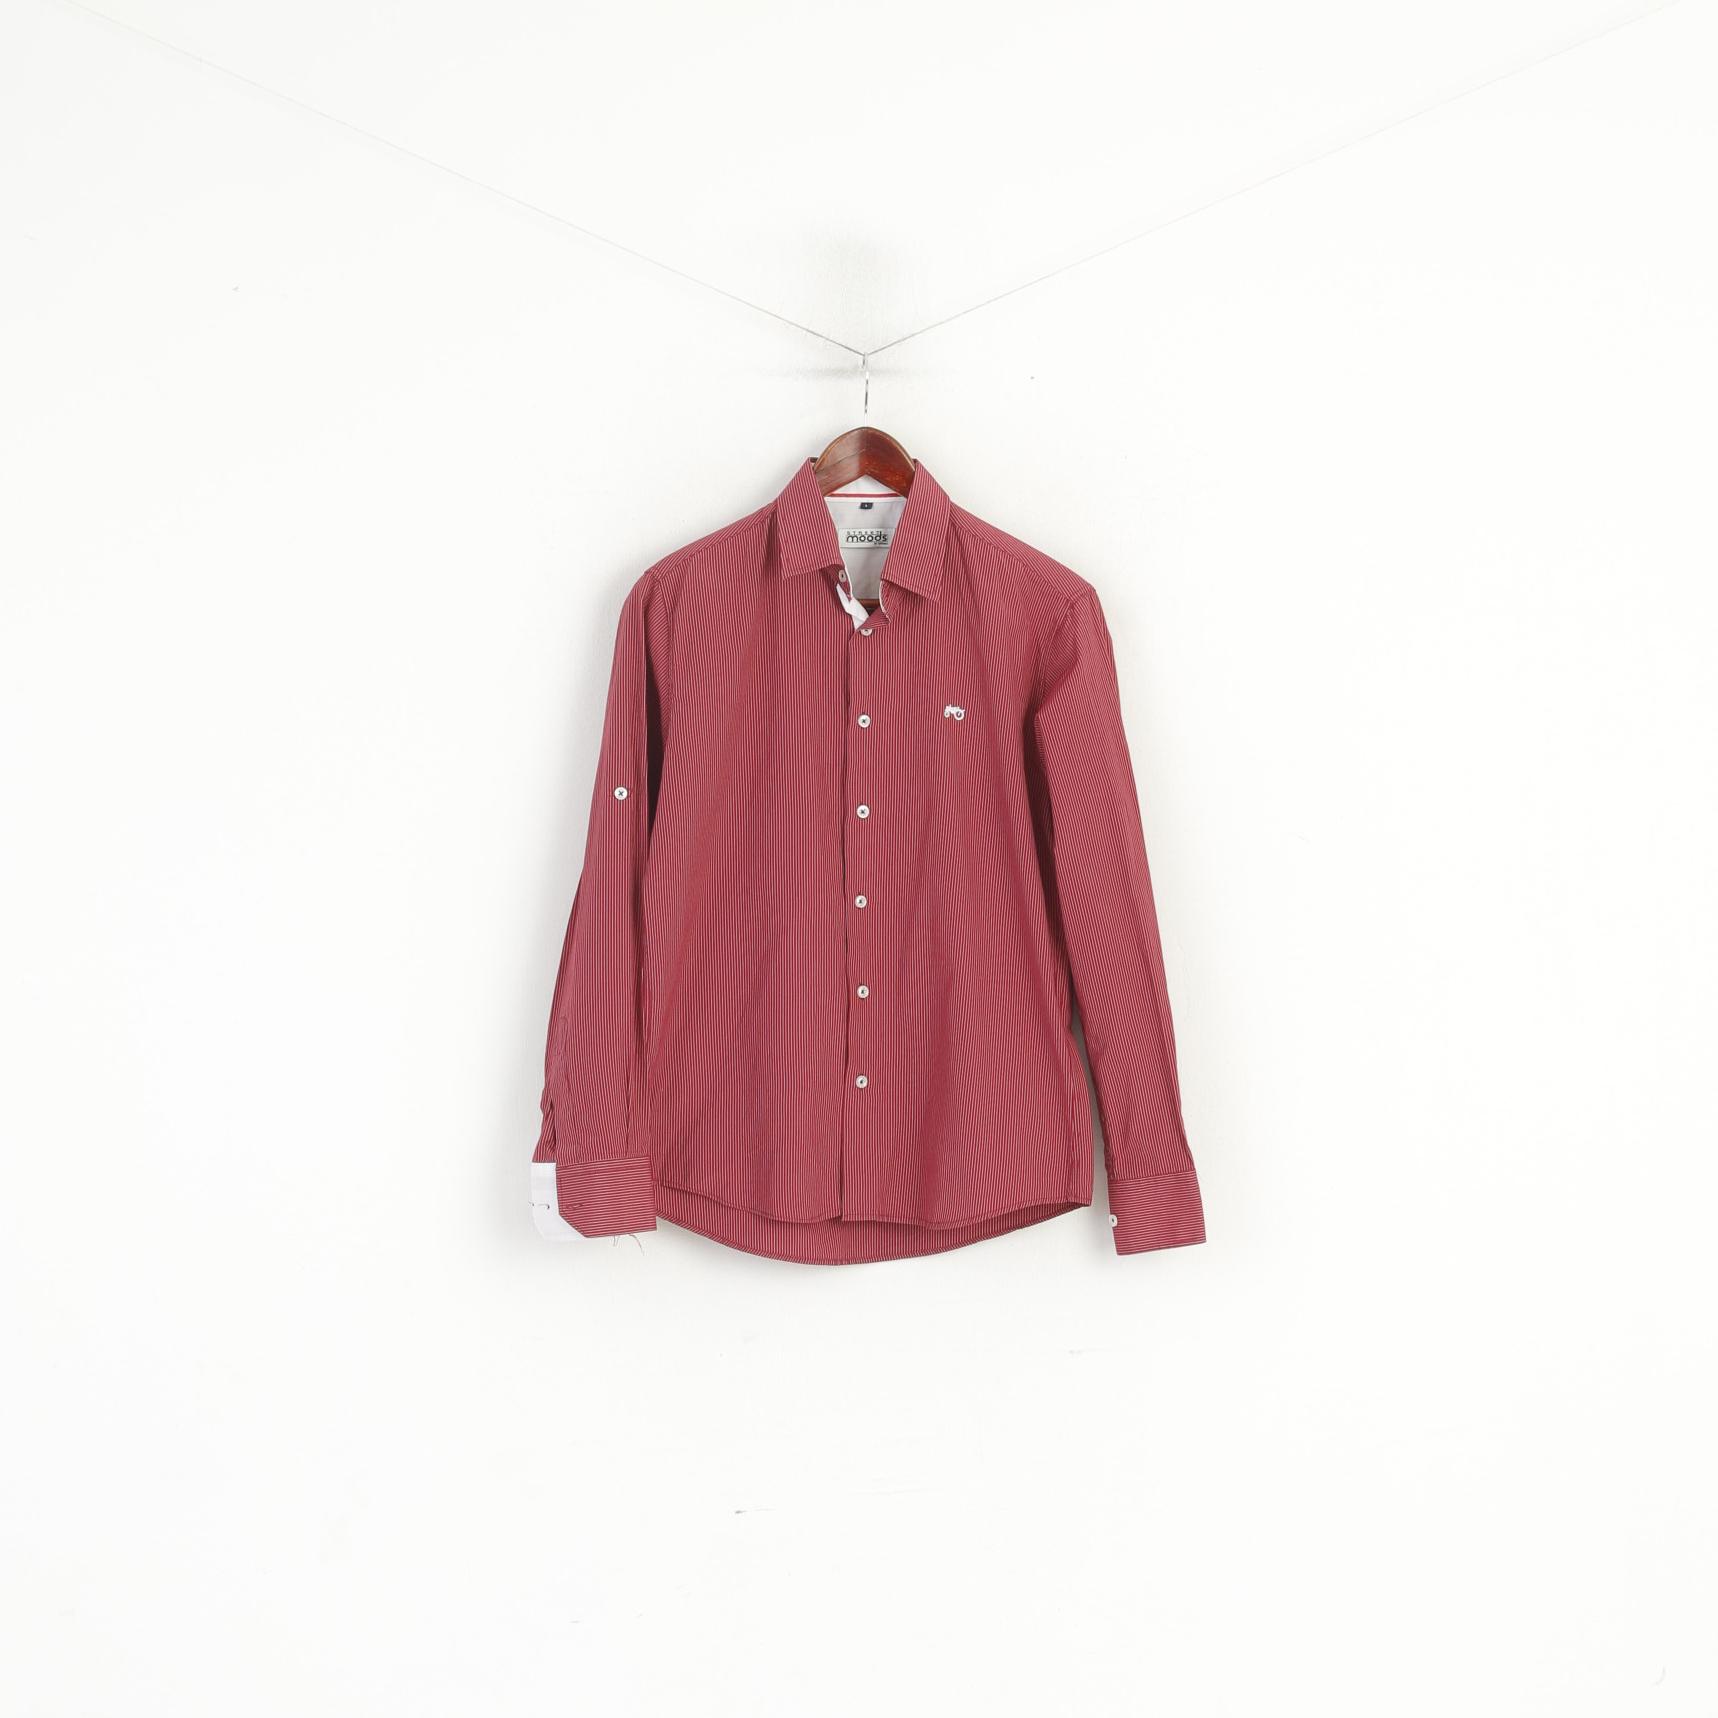 Men's Long Sleeve Red & White Striped Shirt -  Norway